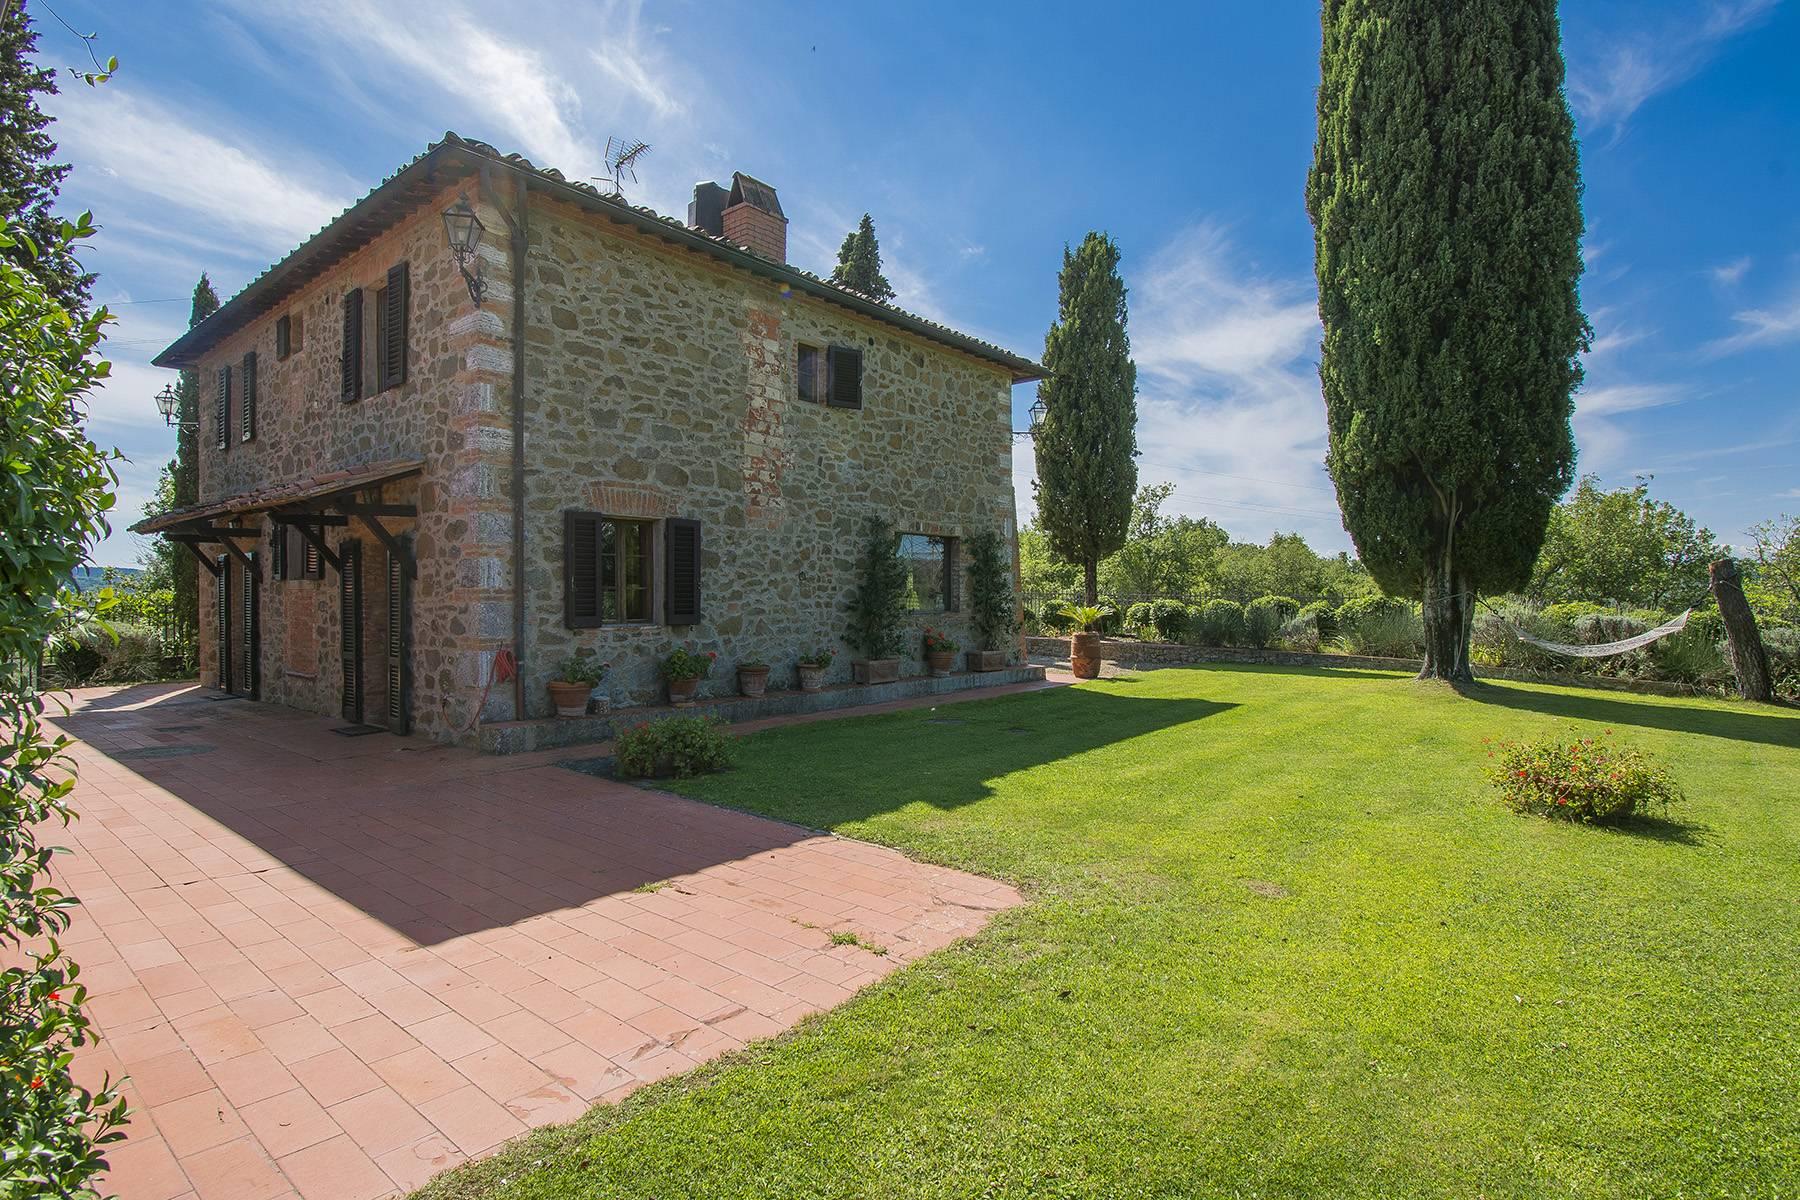 House in the Tuscan Hills for Sale - 2